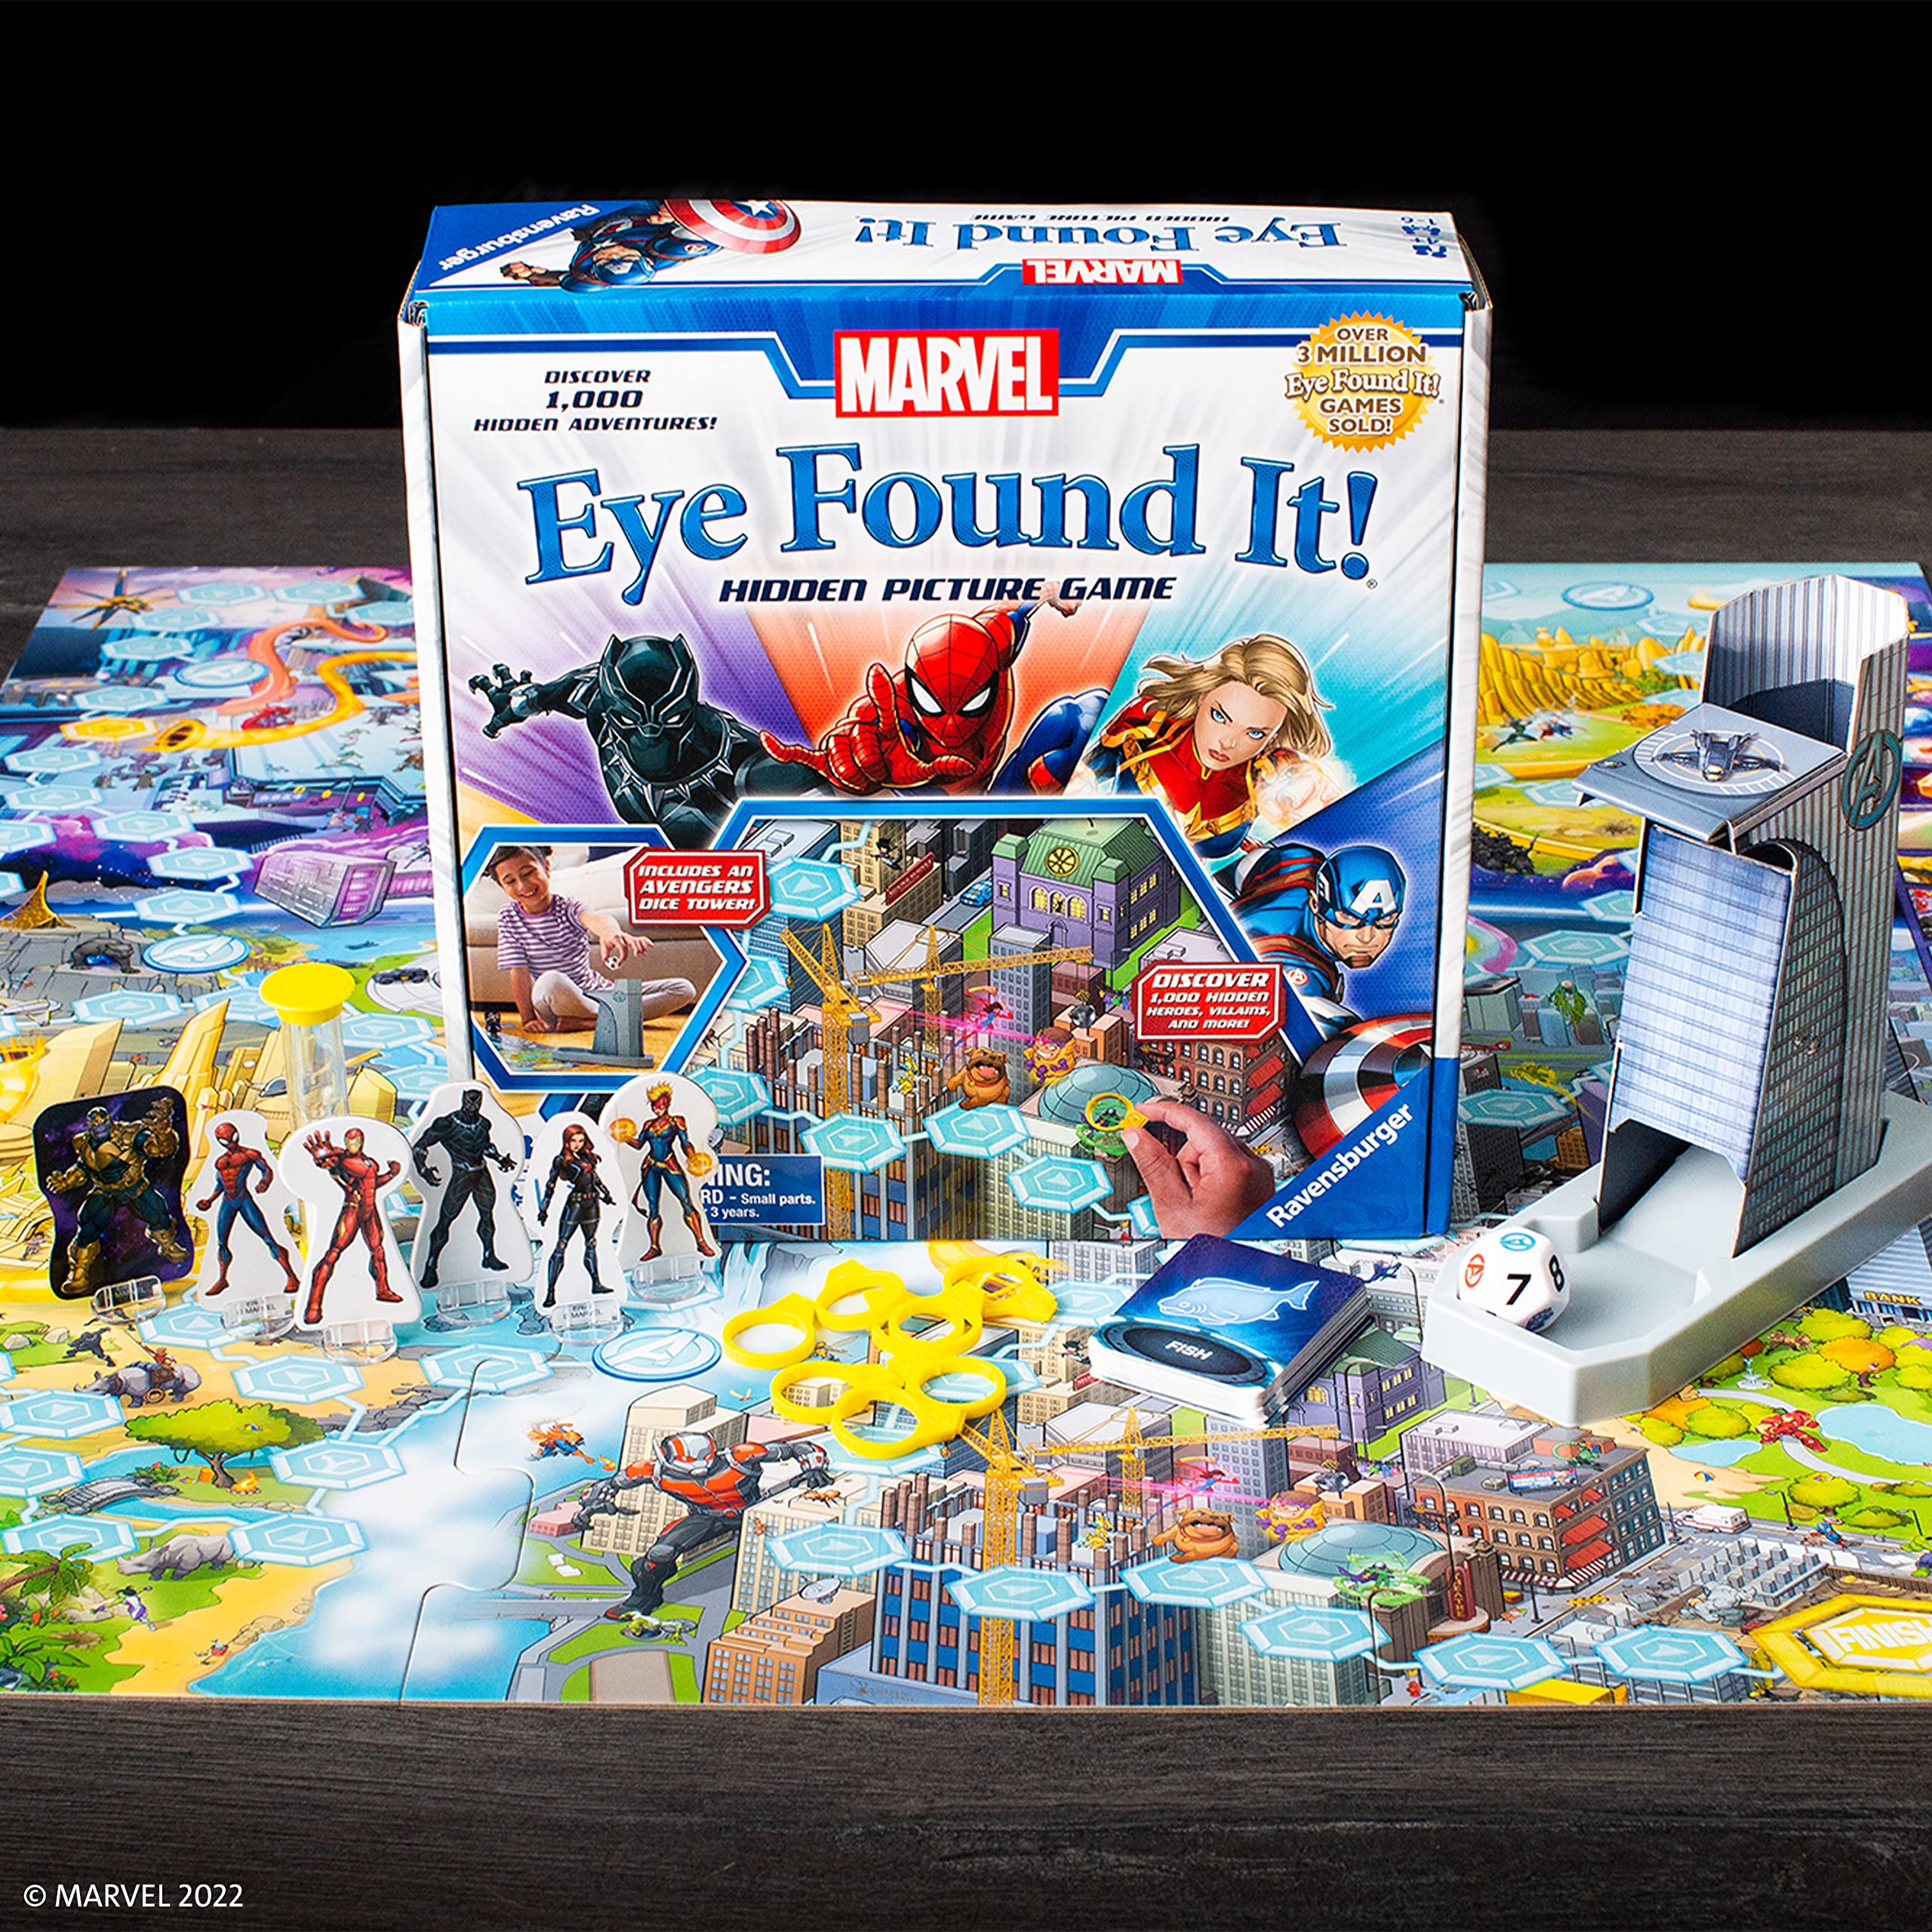 Ravensburger Marvel Eye Found It! Board Game for Boys and Girls Ages 4 and Up - A Fun Family Game